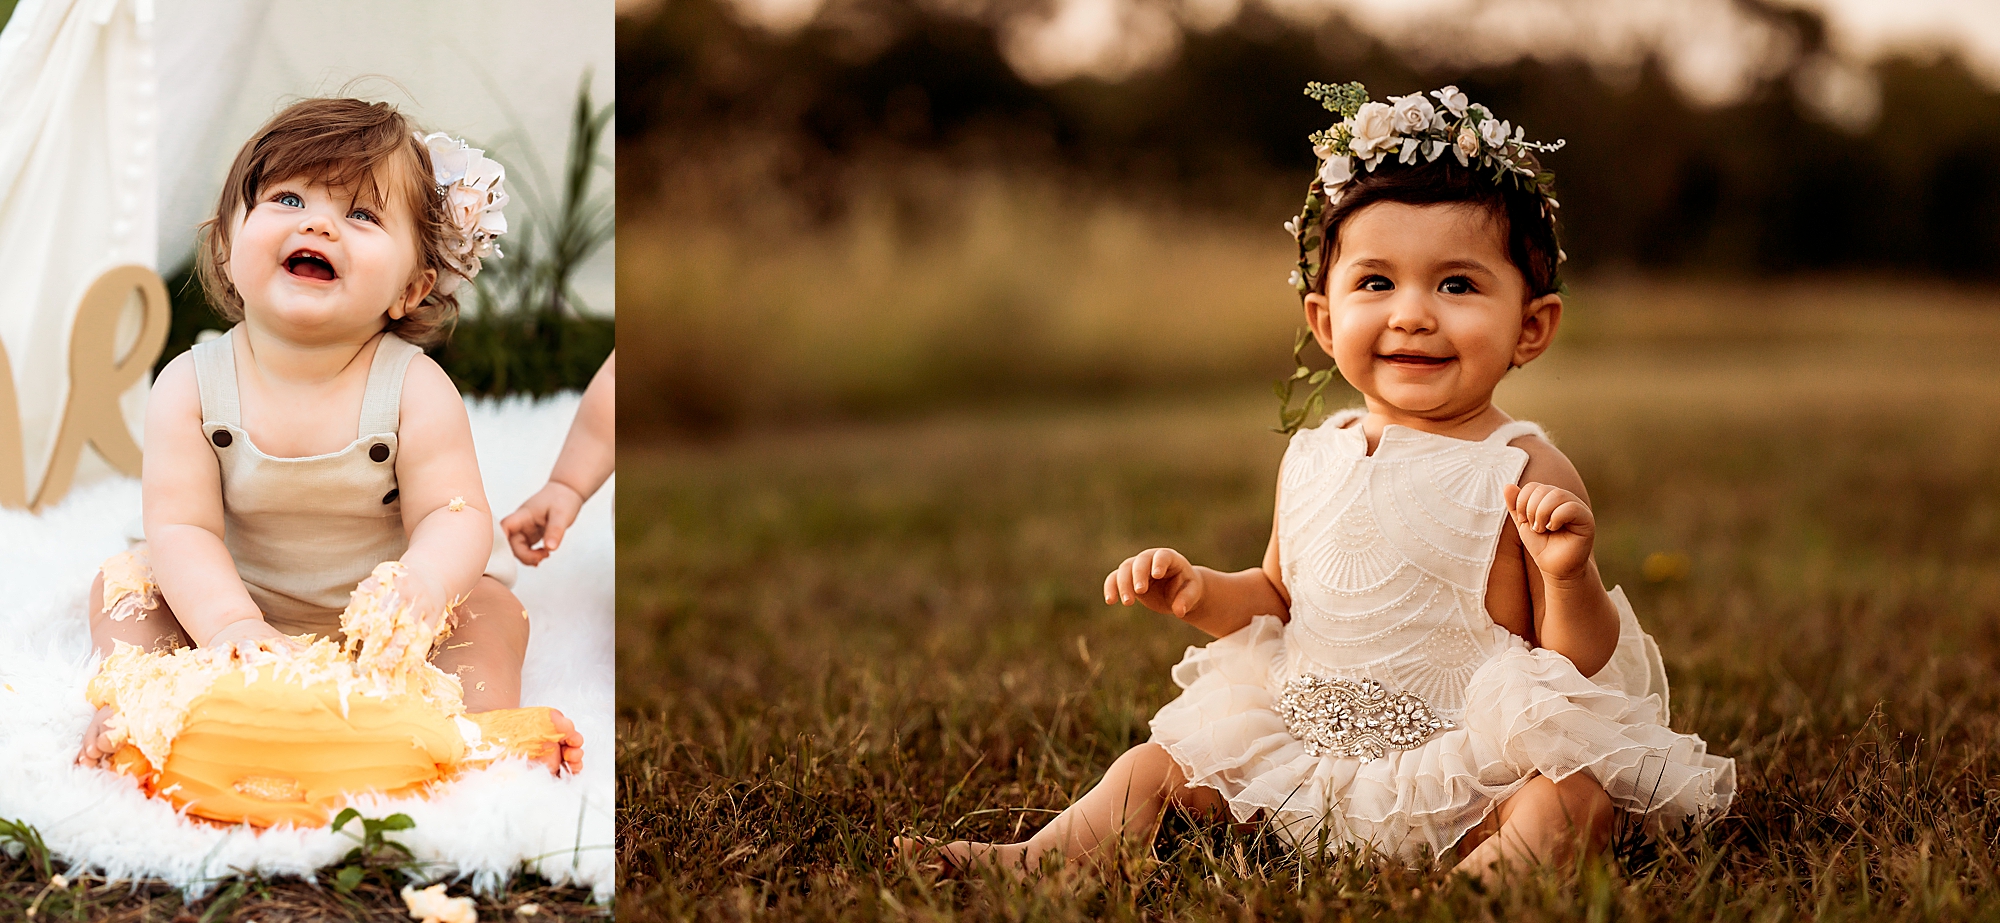 The Woodlands Baby Photographer